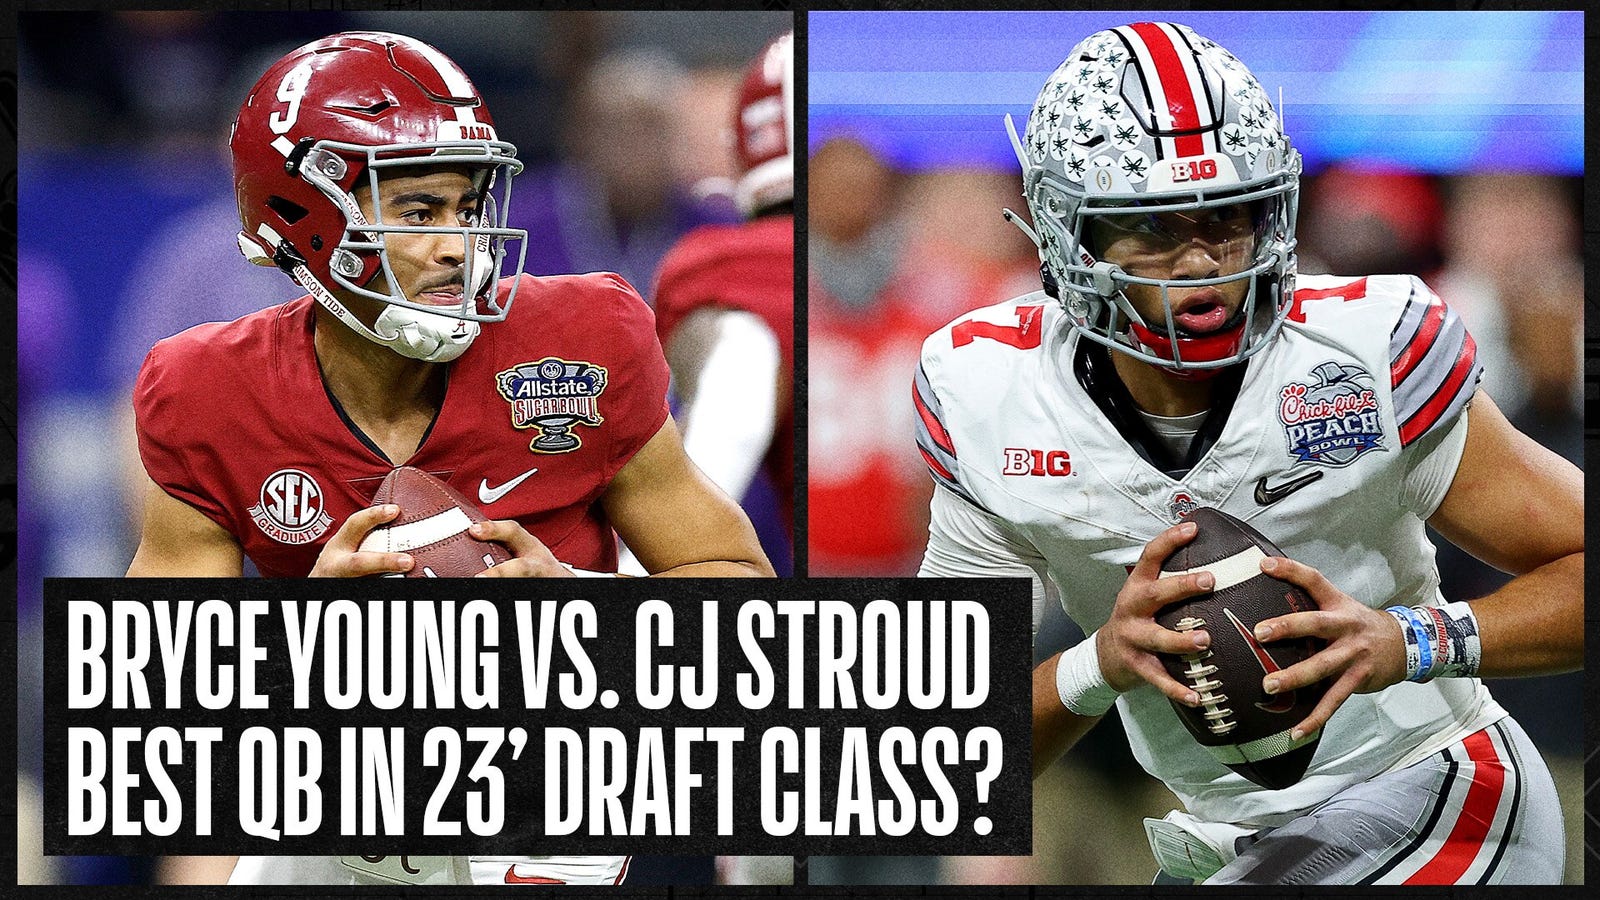 Bryce Young vs CJ Stroud: Who is the best QB in the NFL Draft 